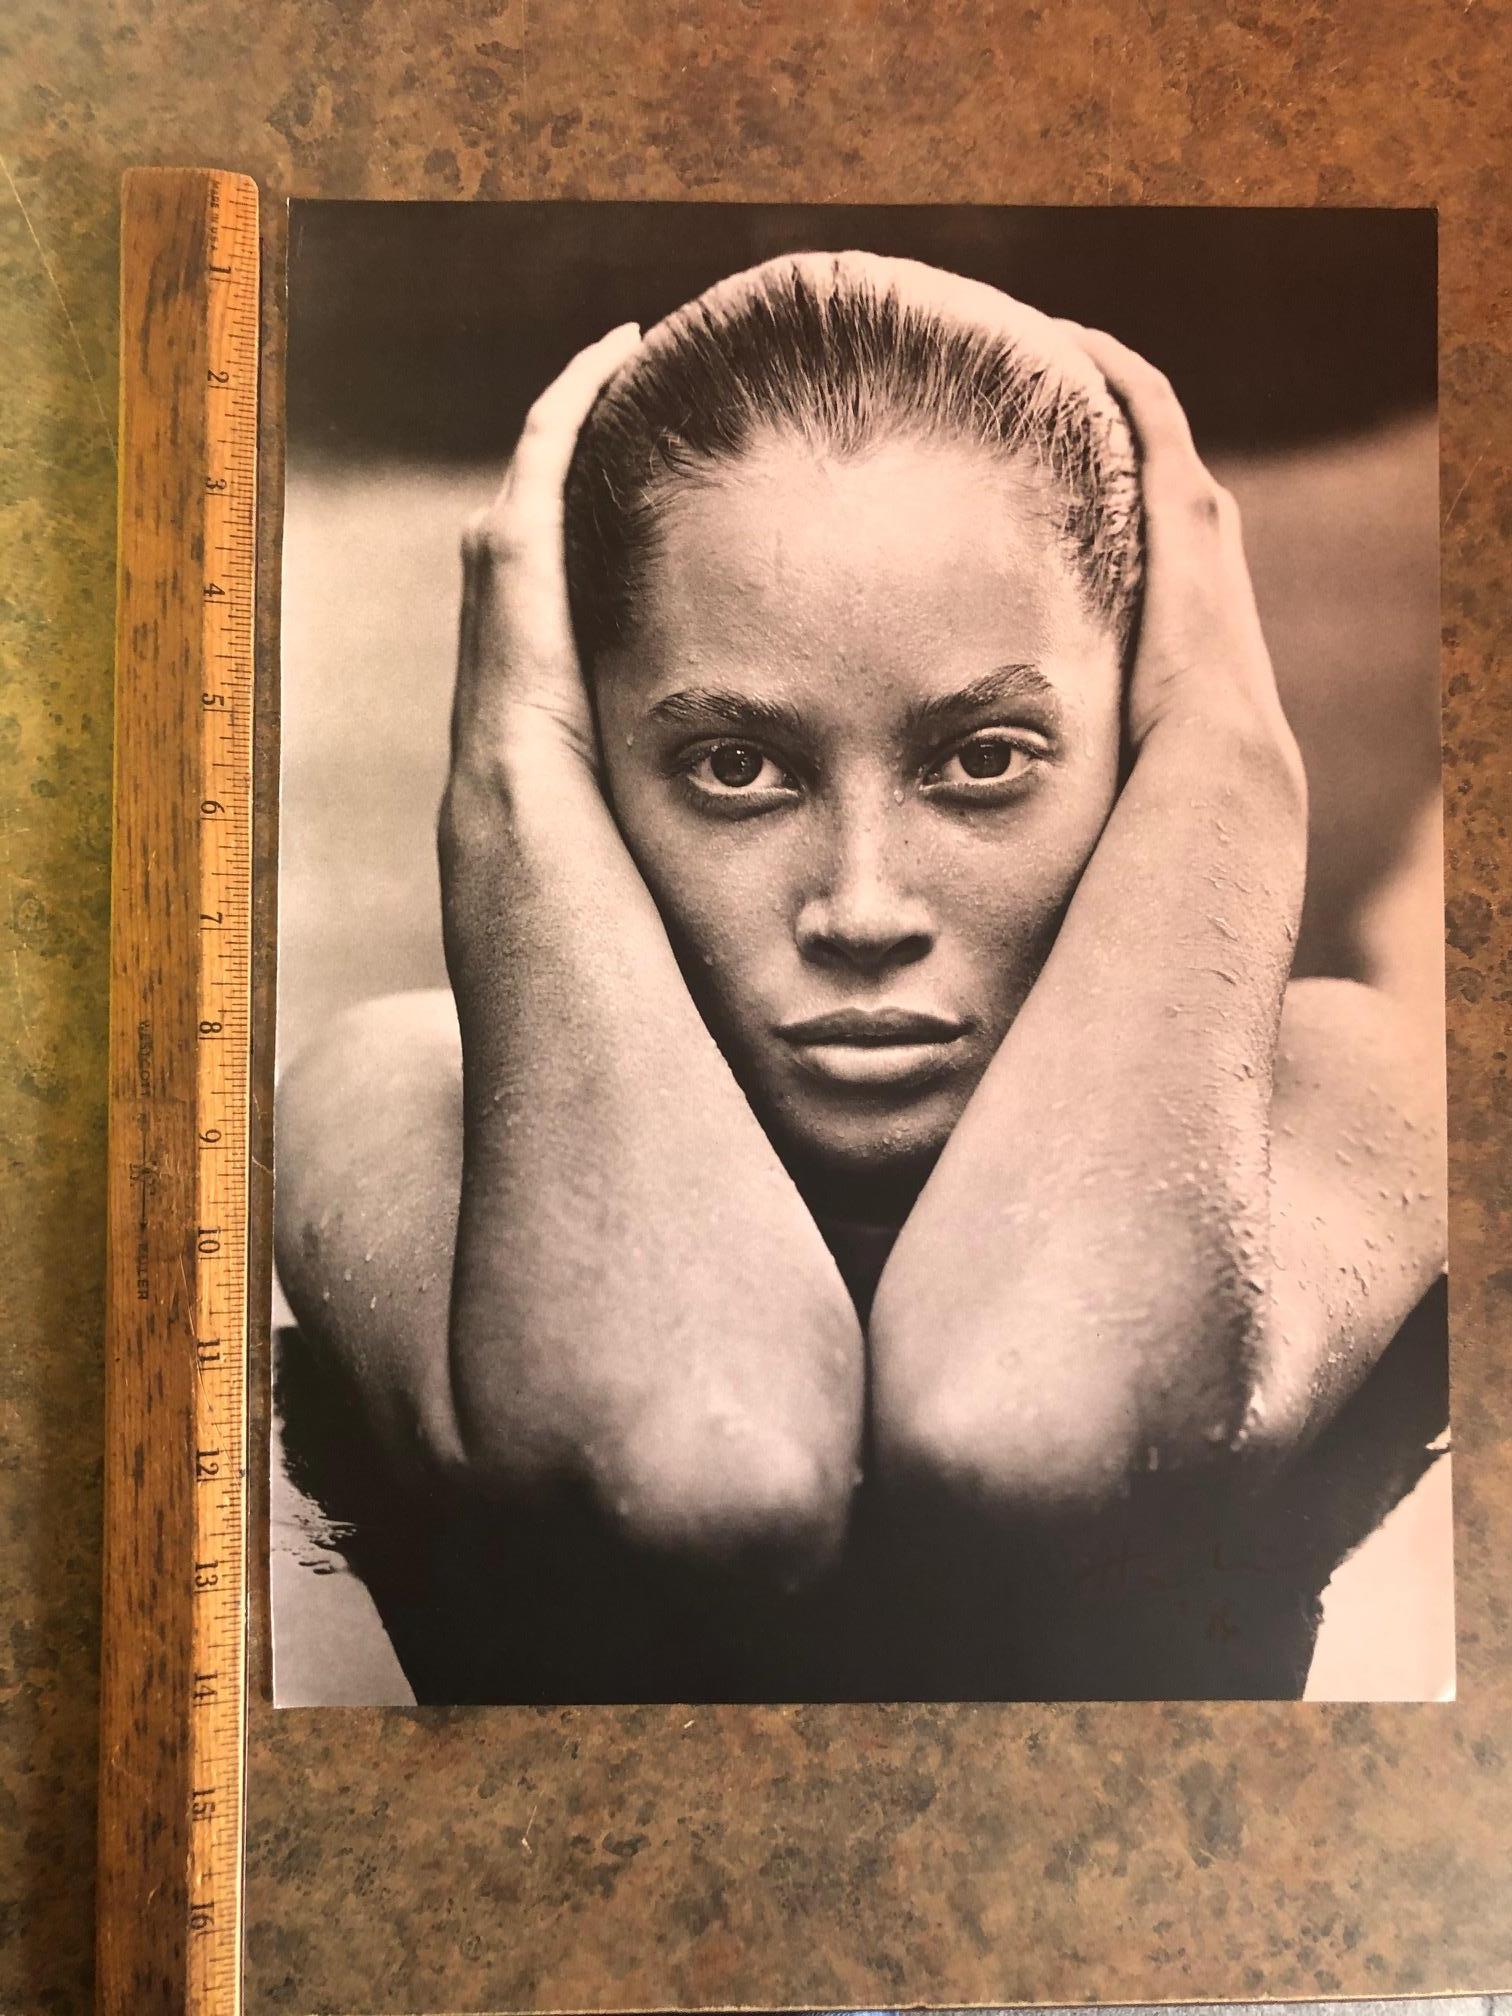 American Herb Ritts Signed Photo, Christy Turlington